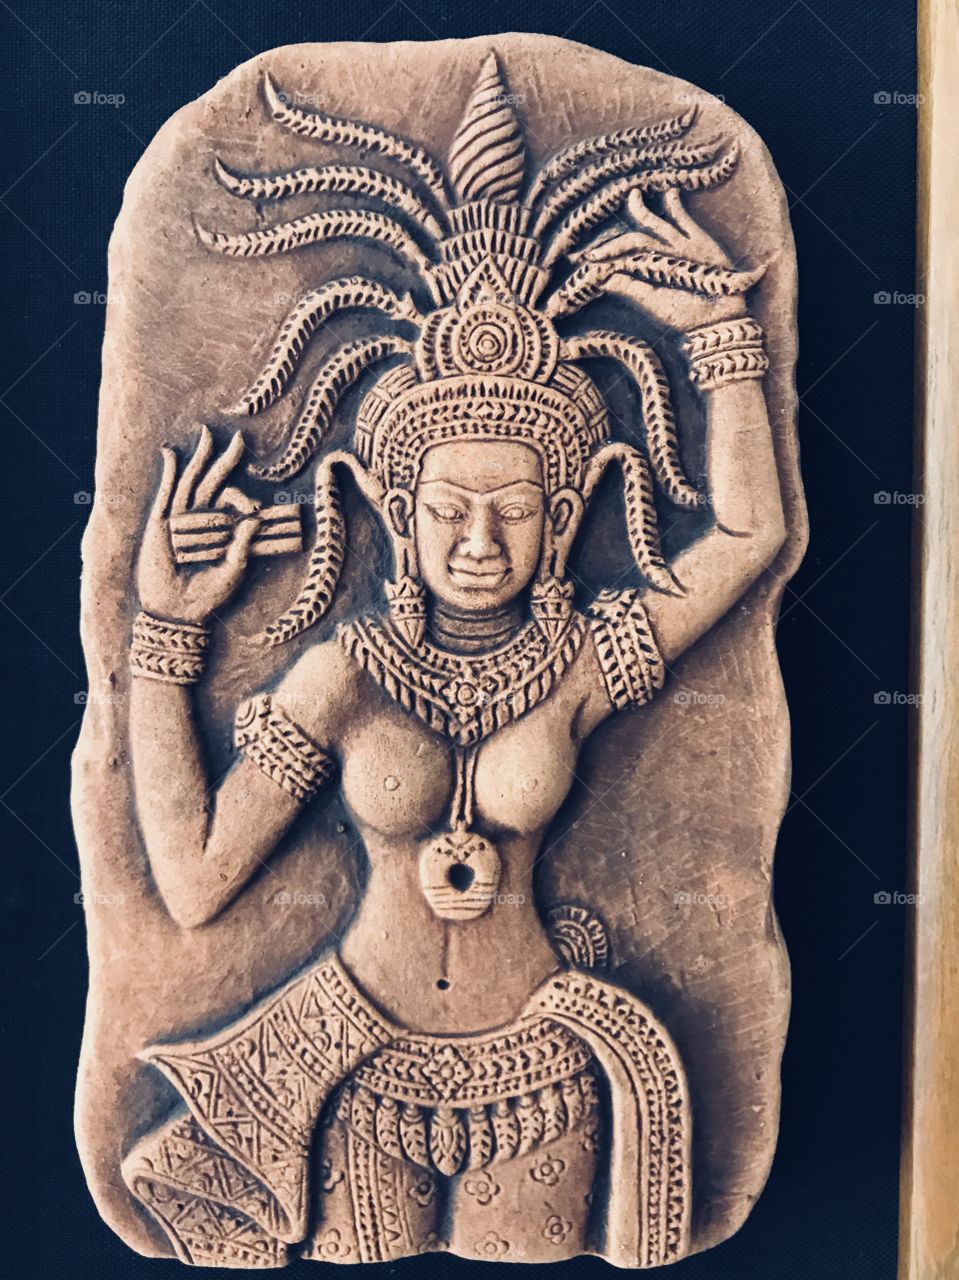 The dancing angle in Cambodian art